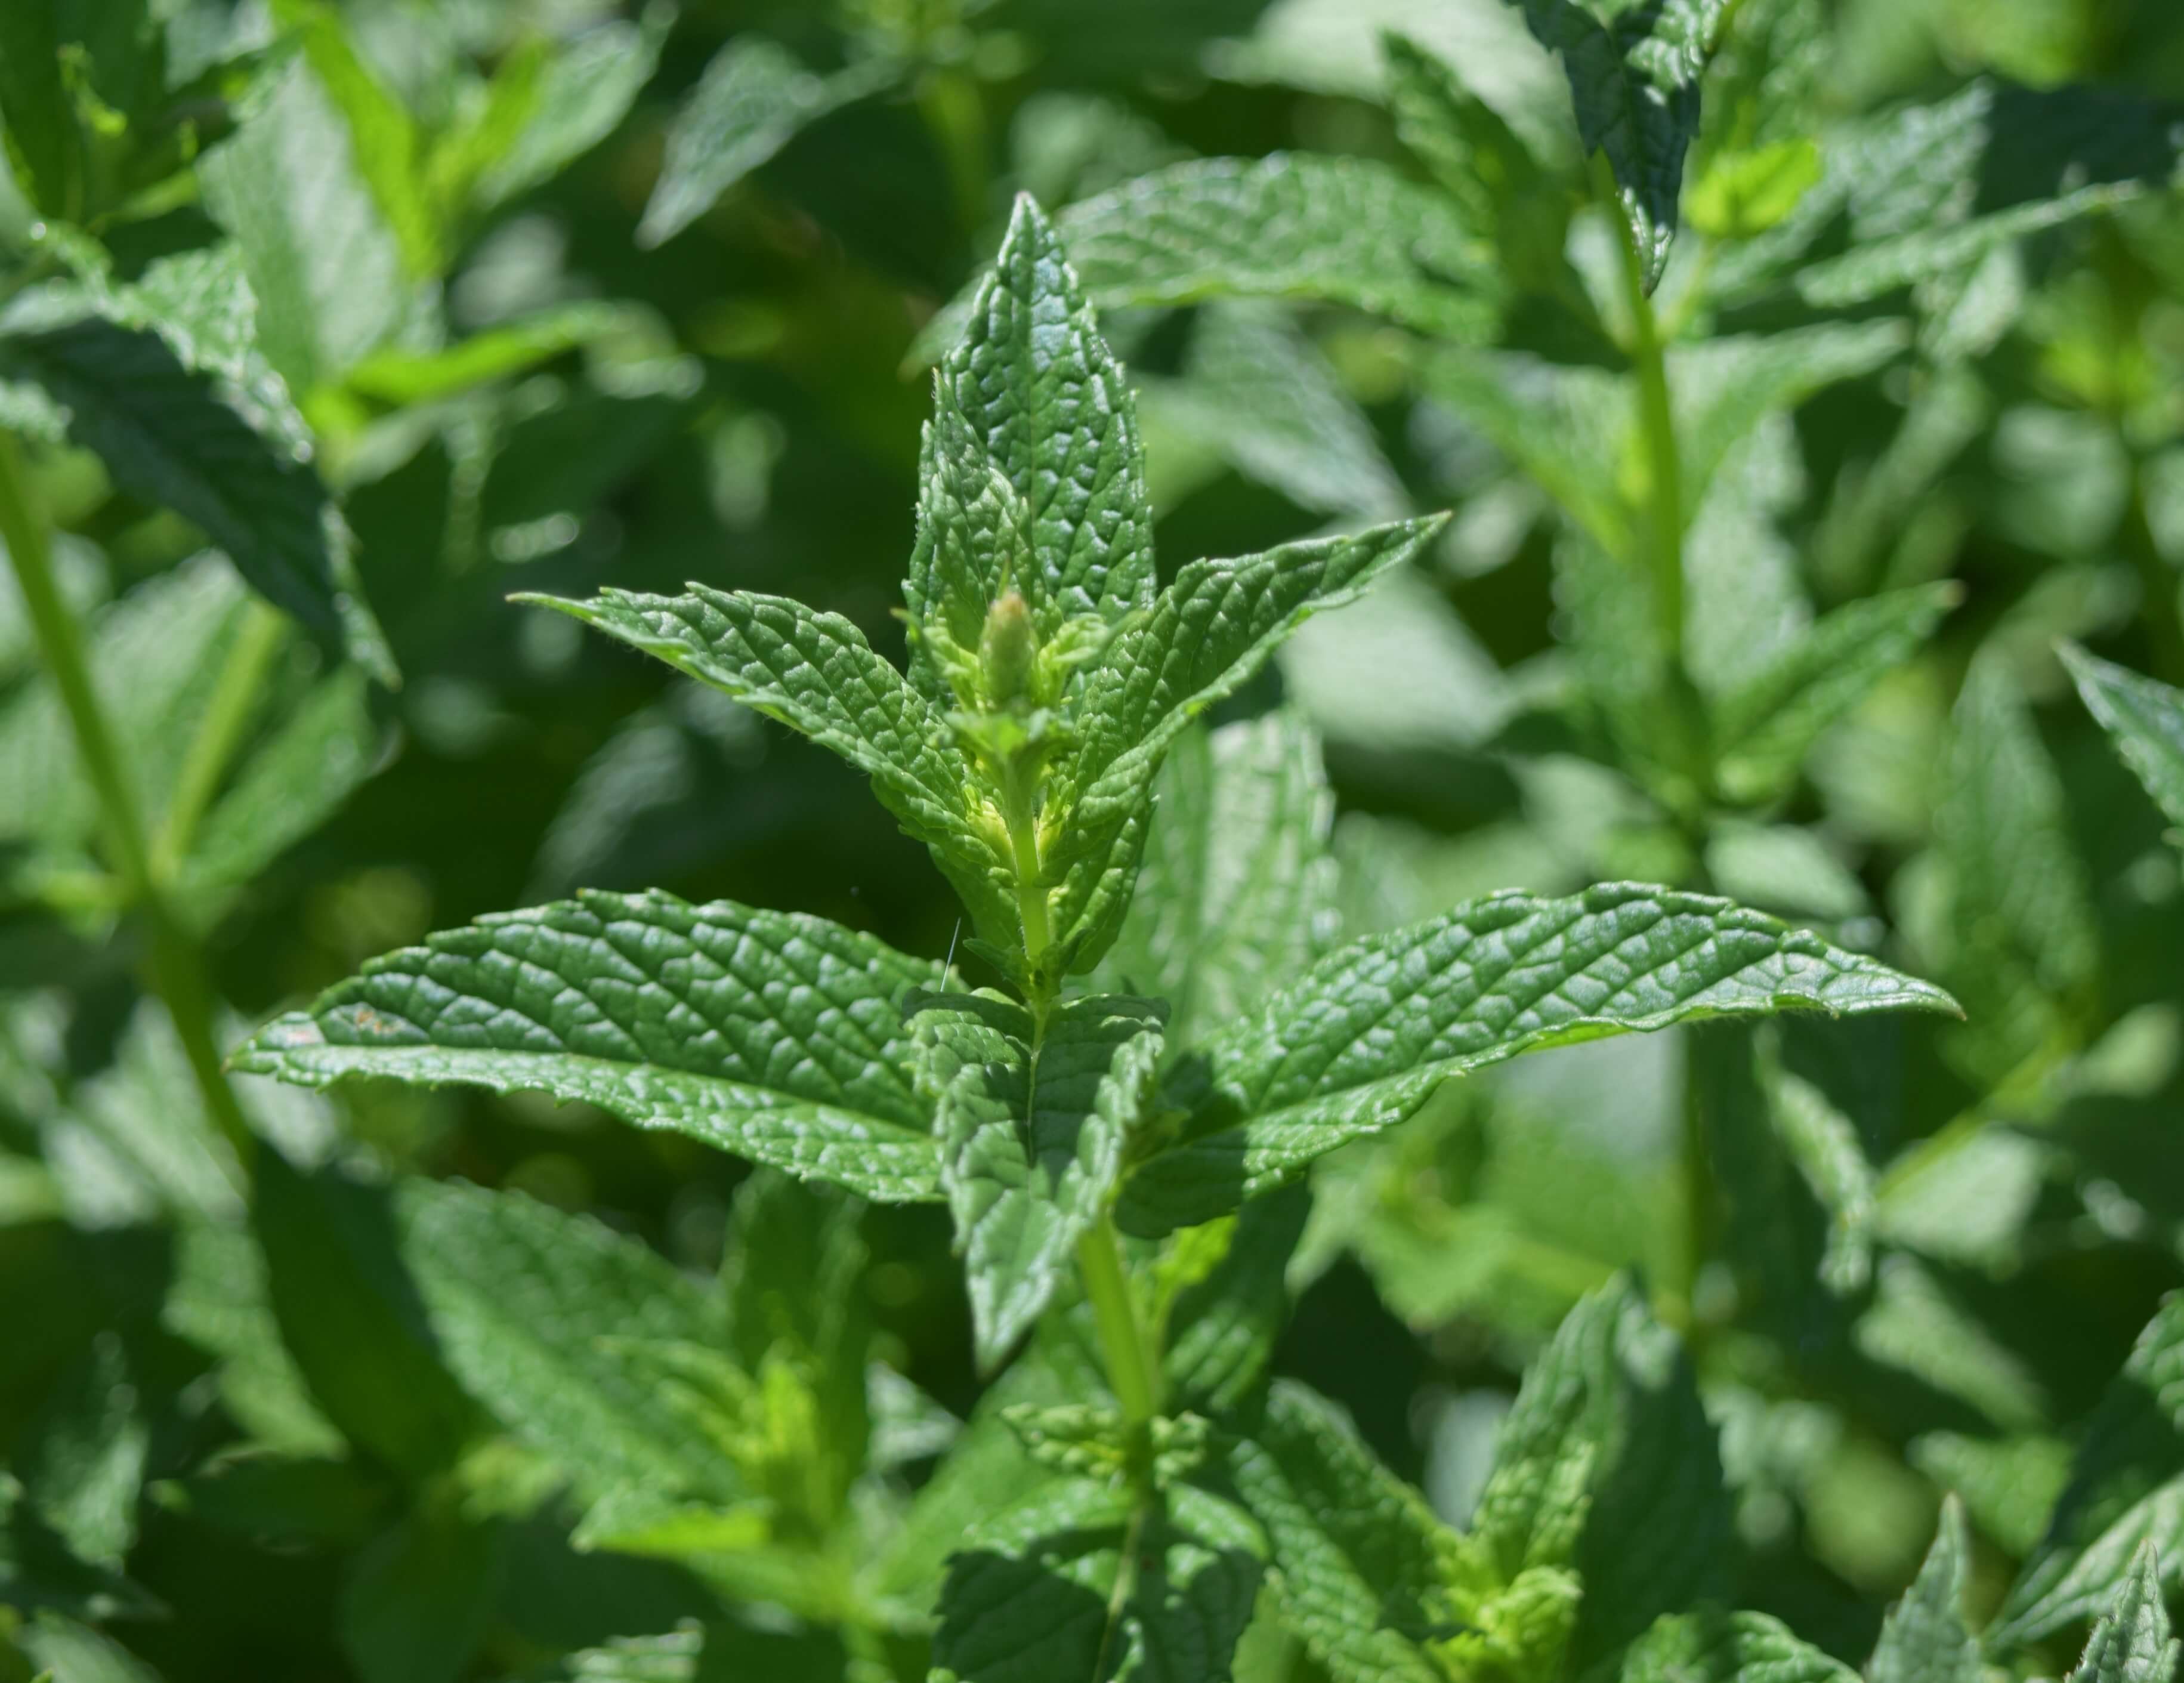 Mint has been cultivated and used in healing and culinary arts dating back to ancient Greece and Rome. It has been found in Egyptian tombs, and was included in rituals used by ancient Assyrians to invoke their fire god.